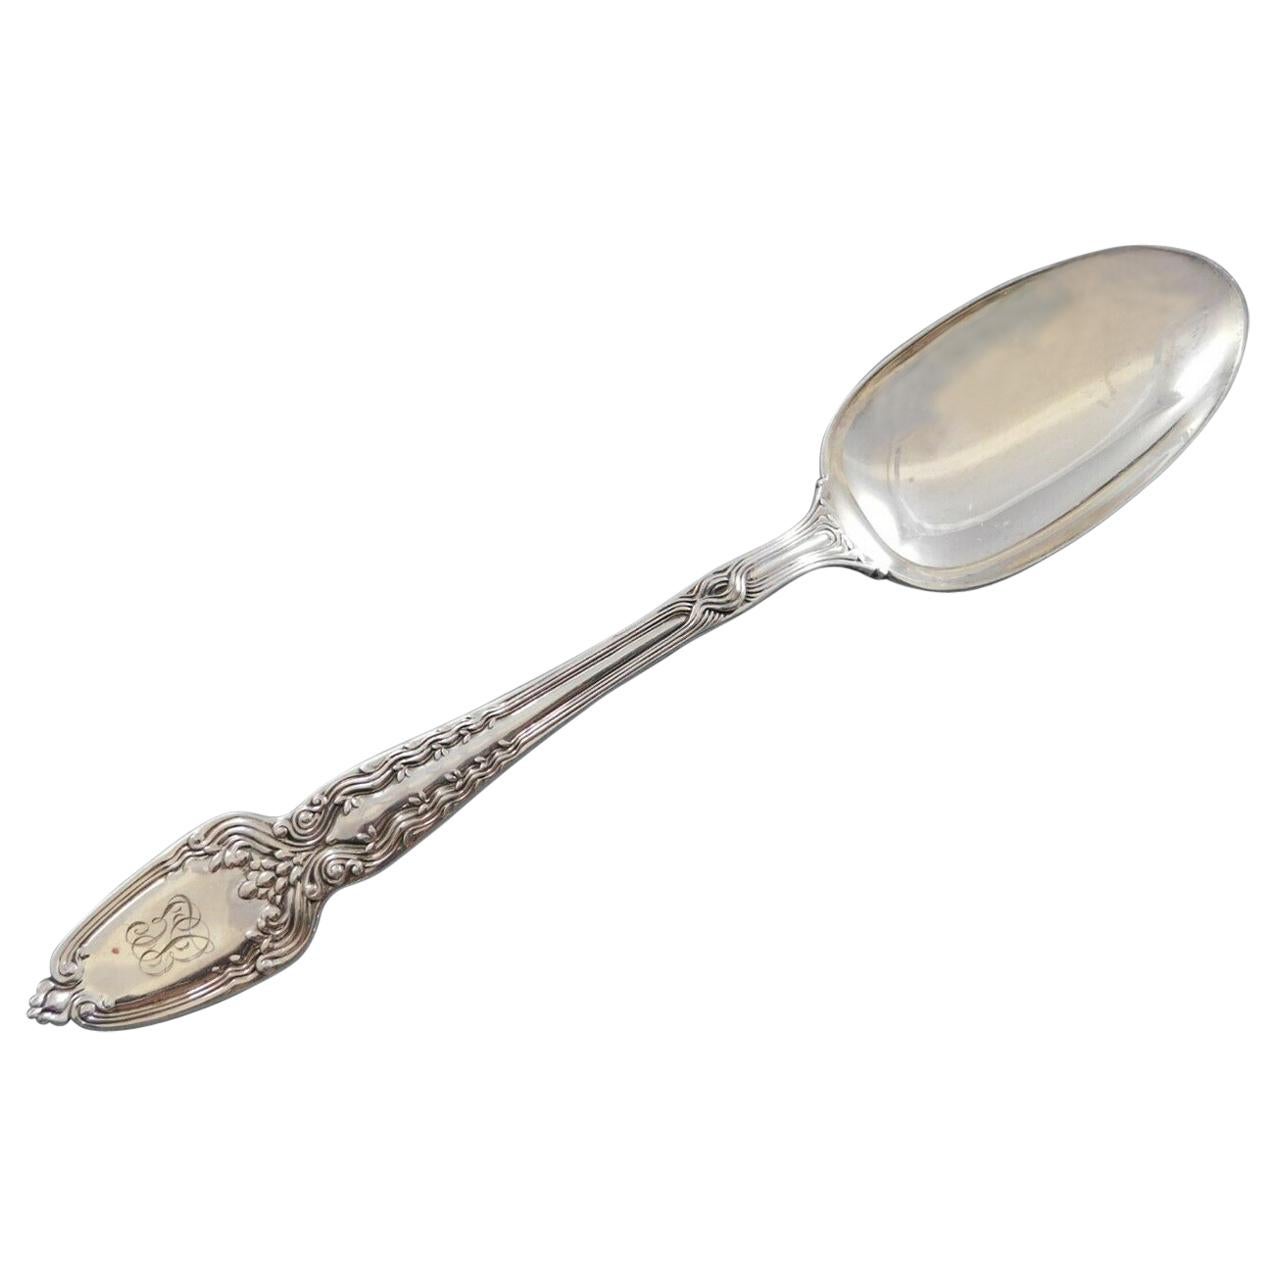 Broom Corn by Tiffany & Co. Sterling Silver Serving Spoon